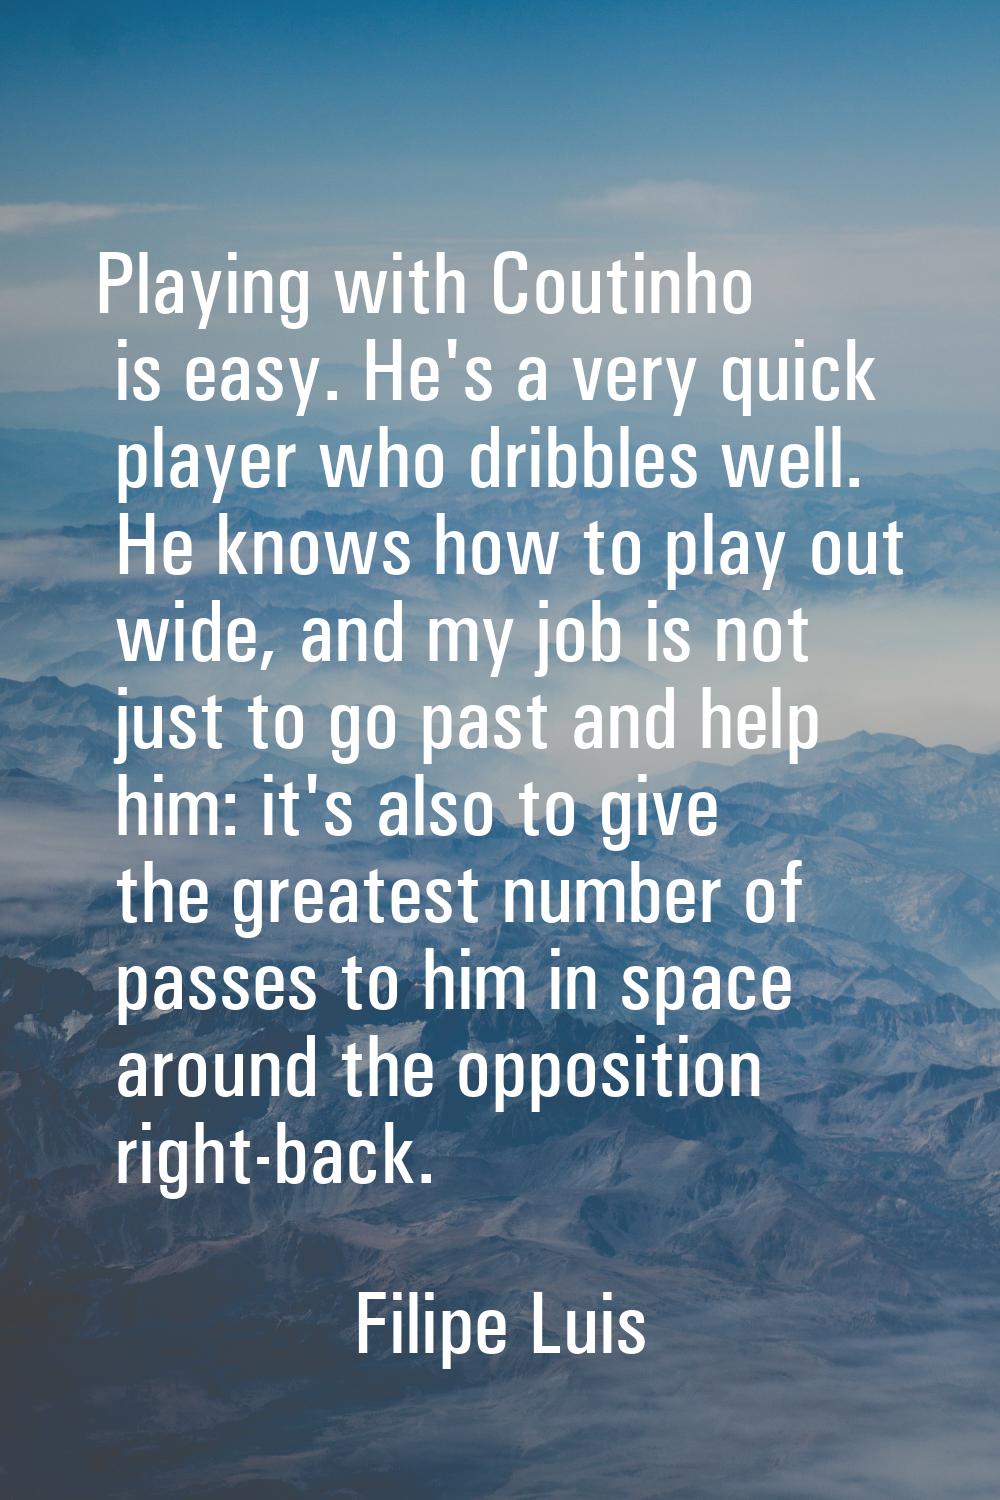 Playing with Coutinho is easy. He's a very quick player who dribbles well. He knows how to play out